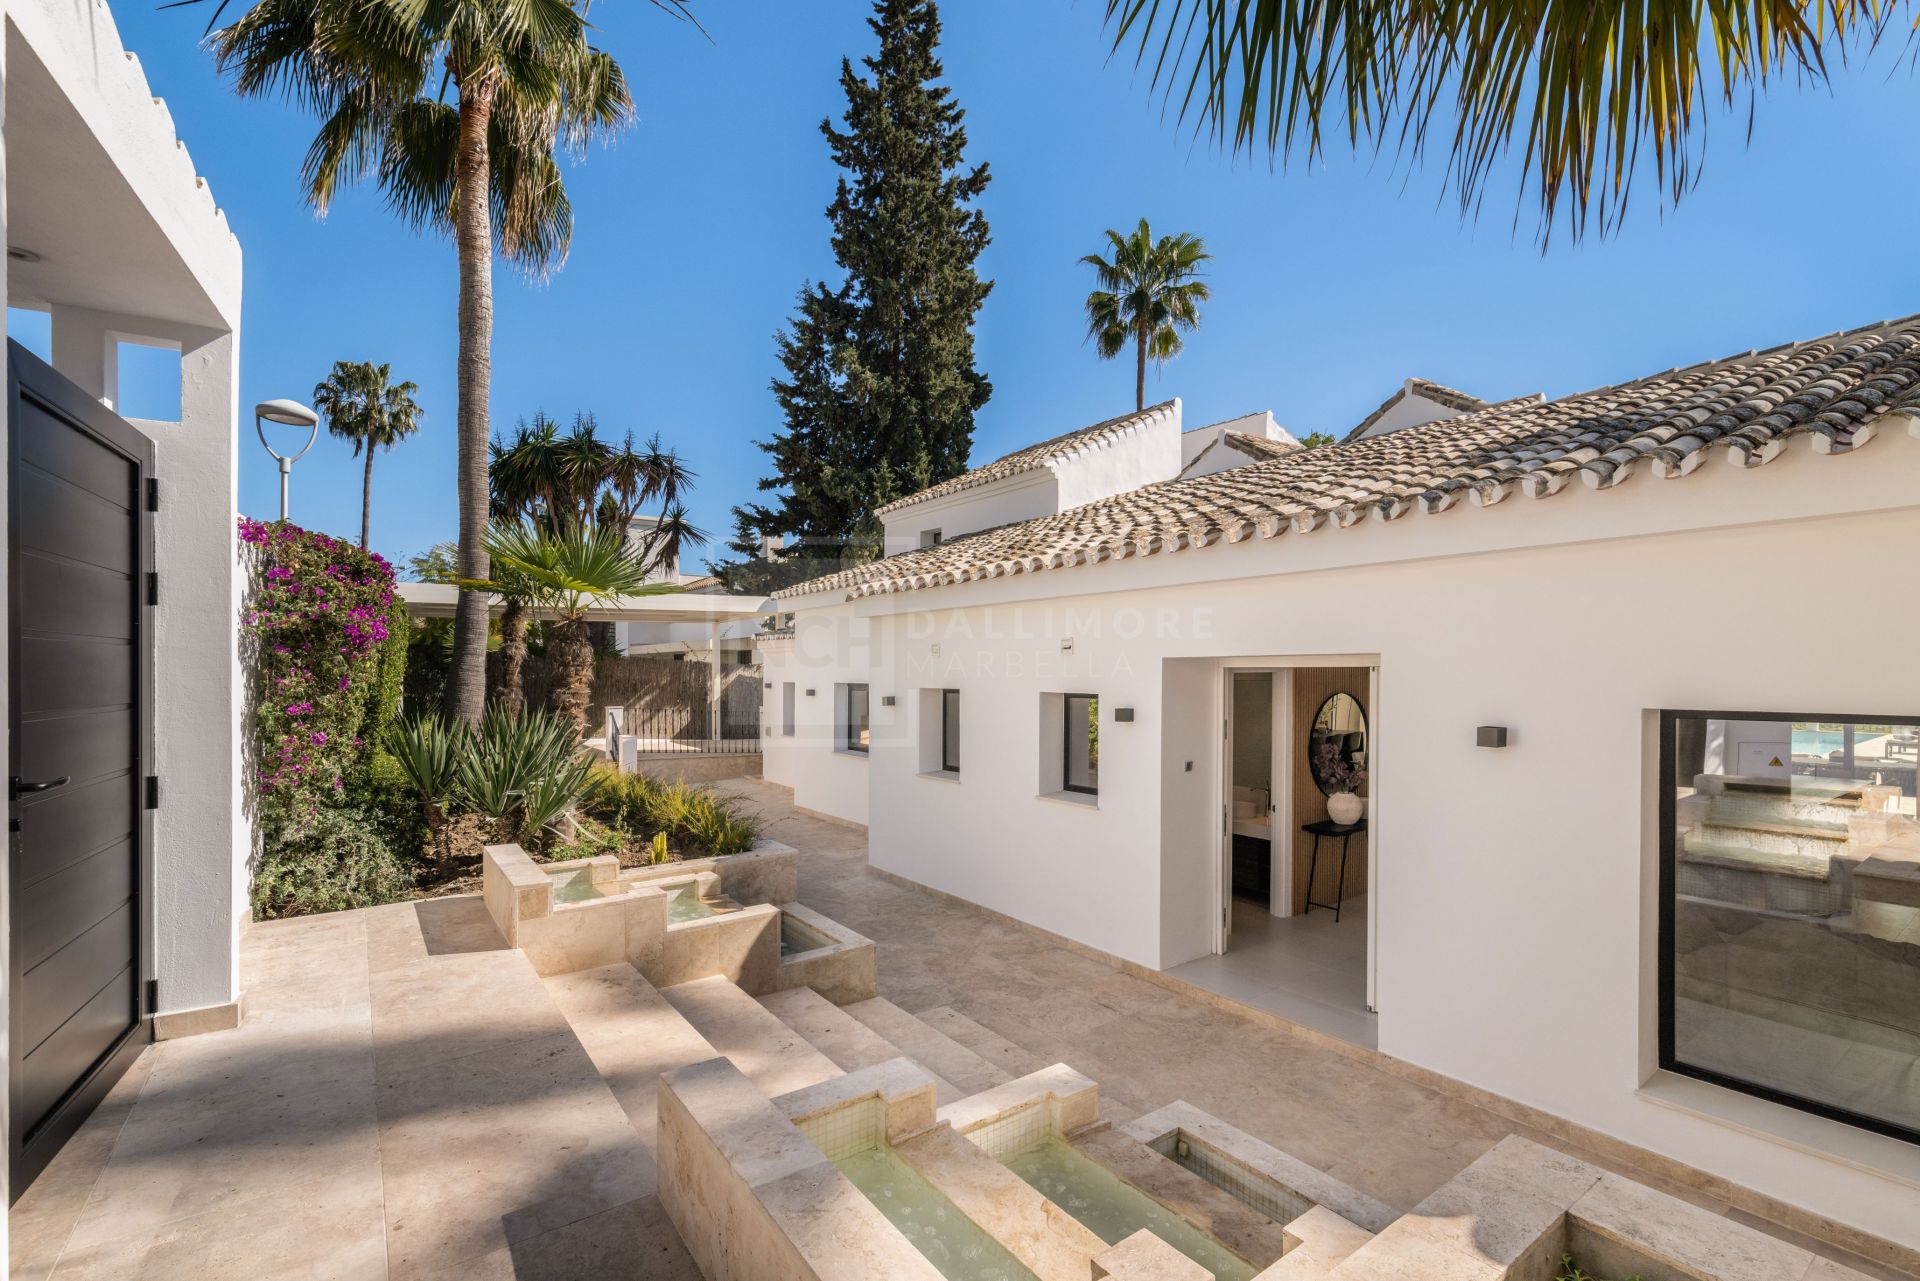 LUXURY GOLF-SIDE PROPERTY IN ONE OF MARBELLA'S EXCLUSIVE GATED COMMUNITIES